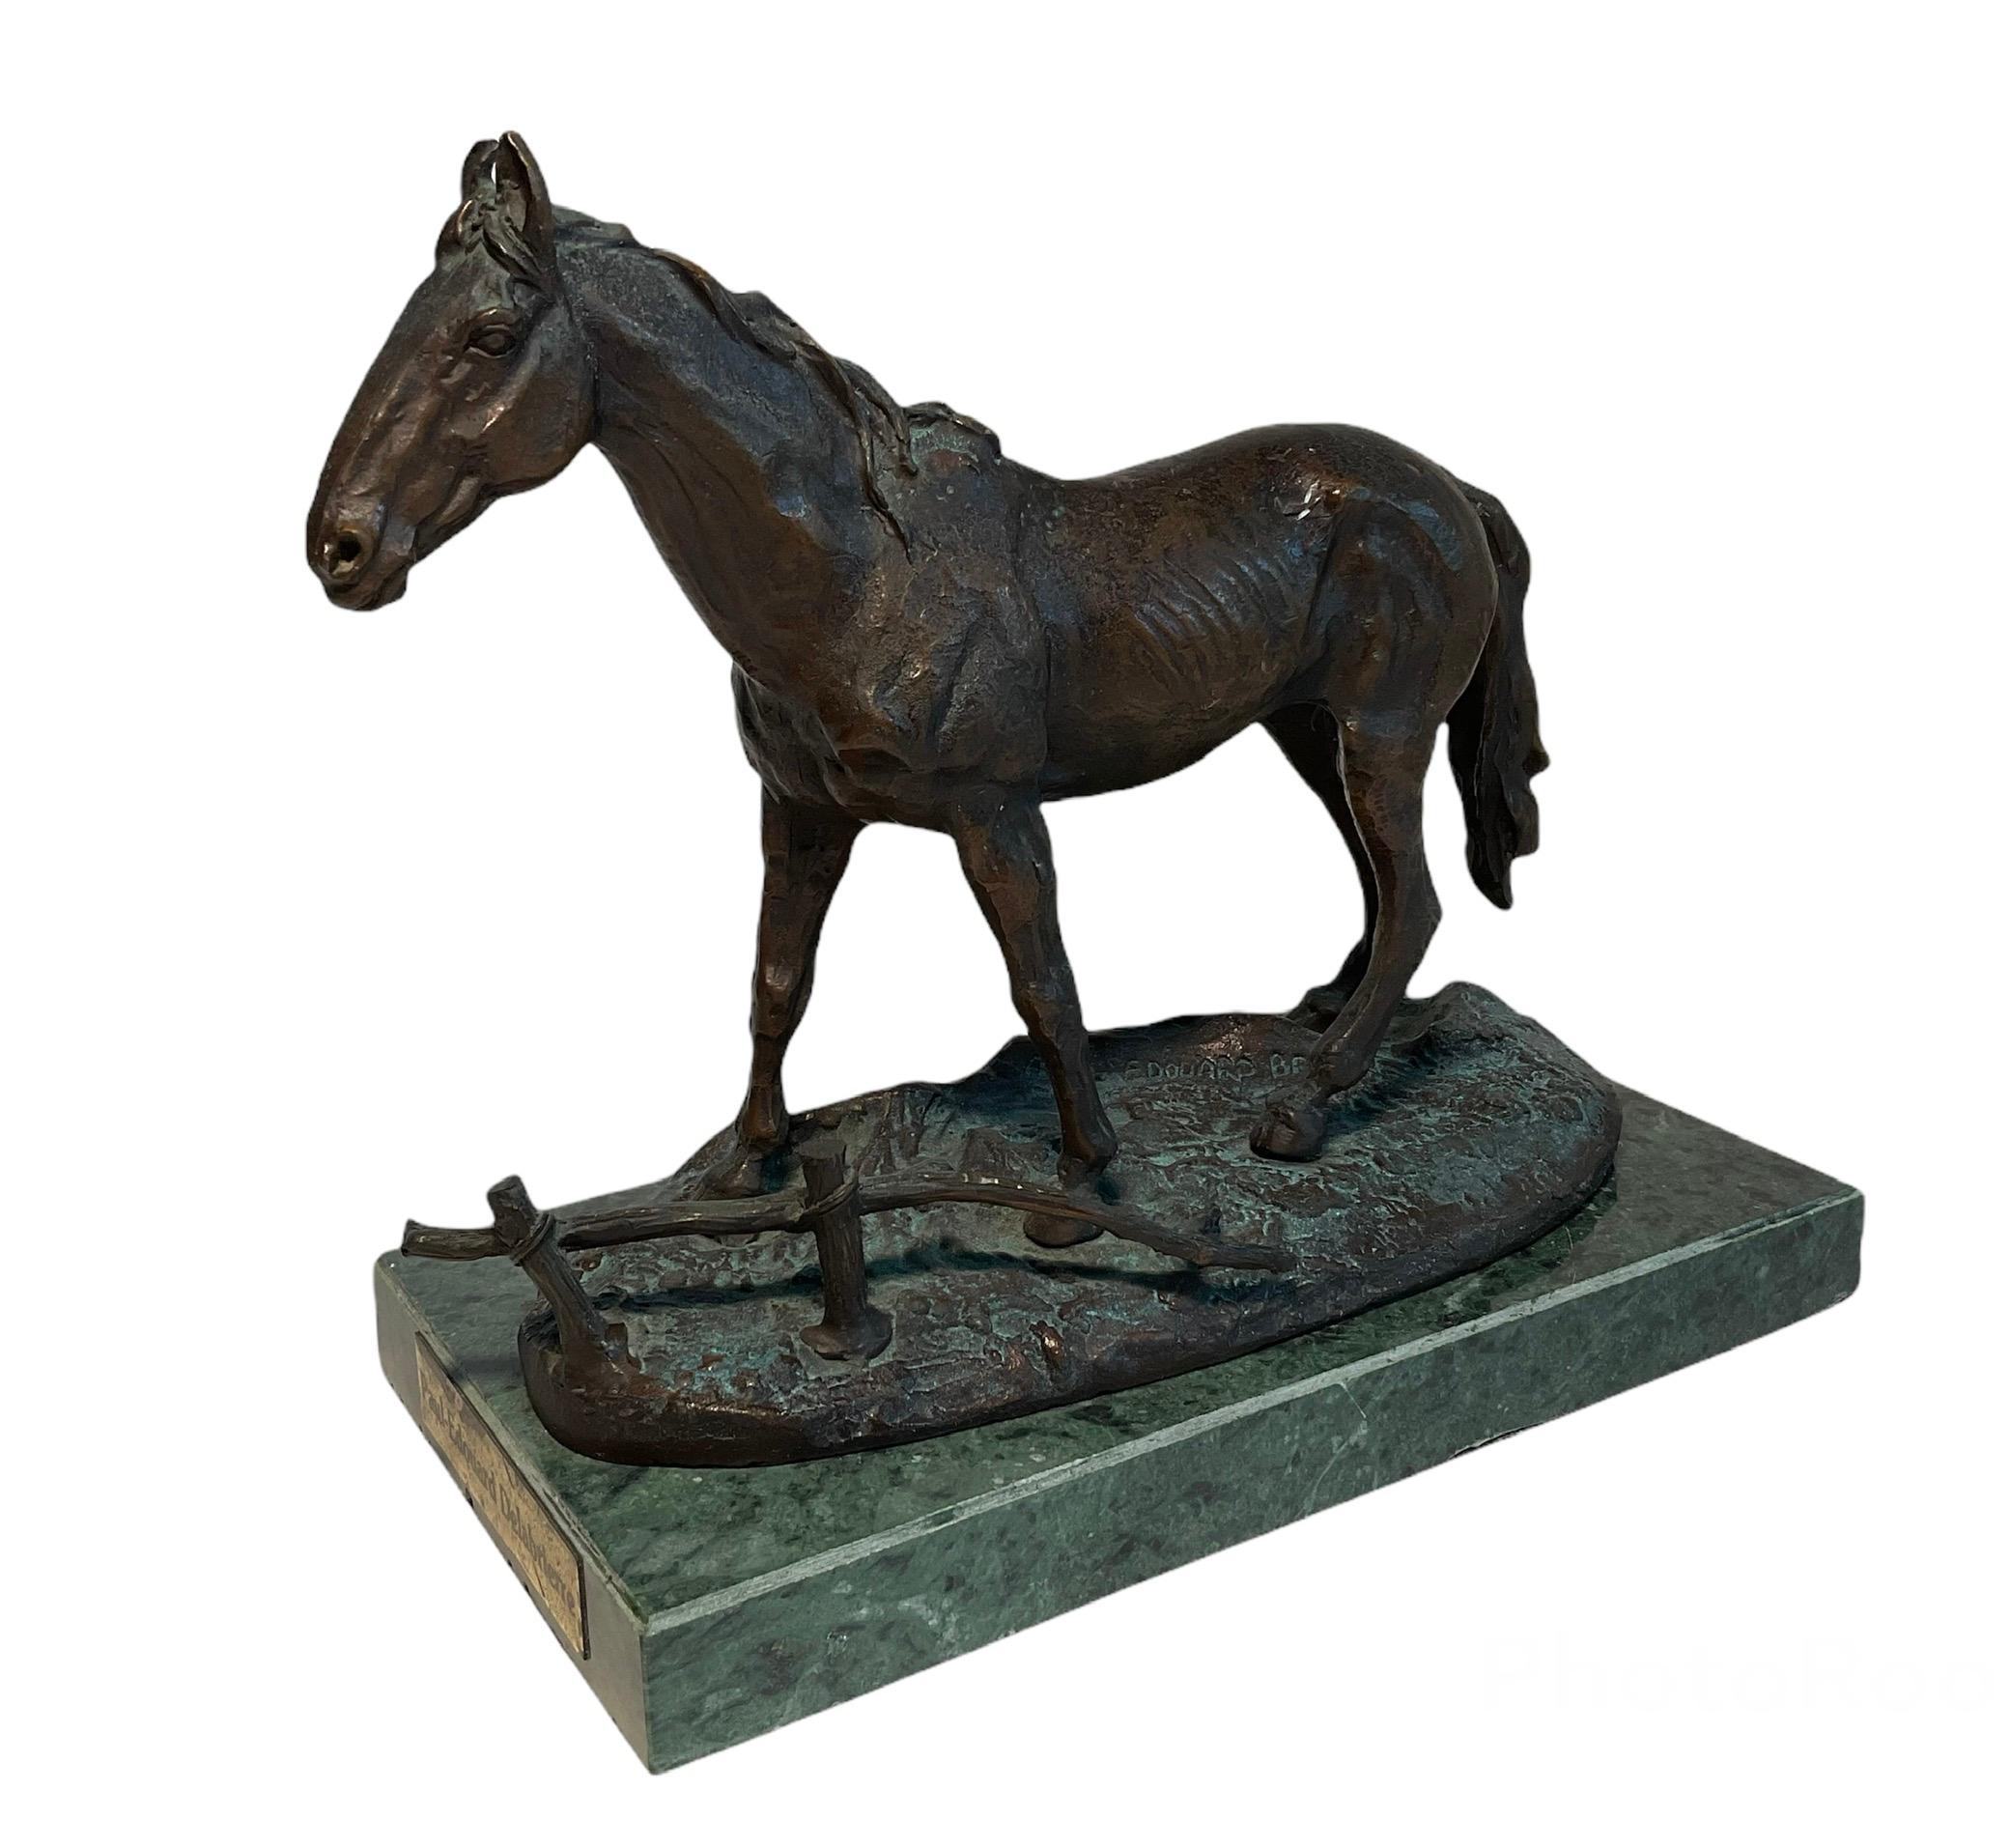 This is a bronze sculpture of a horse after Paul E. Delabrierre. It depicts a horse standing up over soil in front of a broken “wood” fence. The sculpture is supported by a rectangular green marble base.